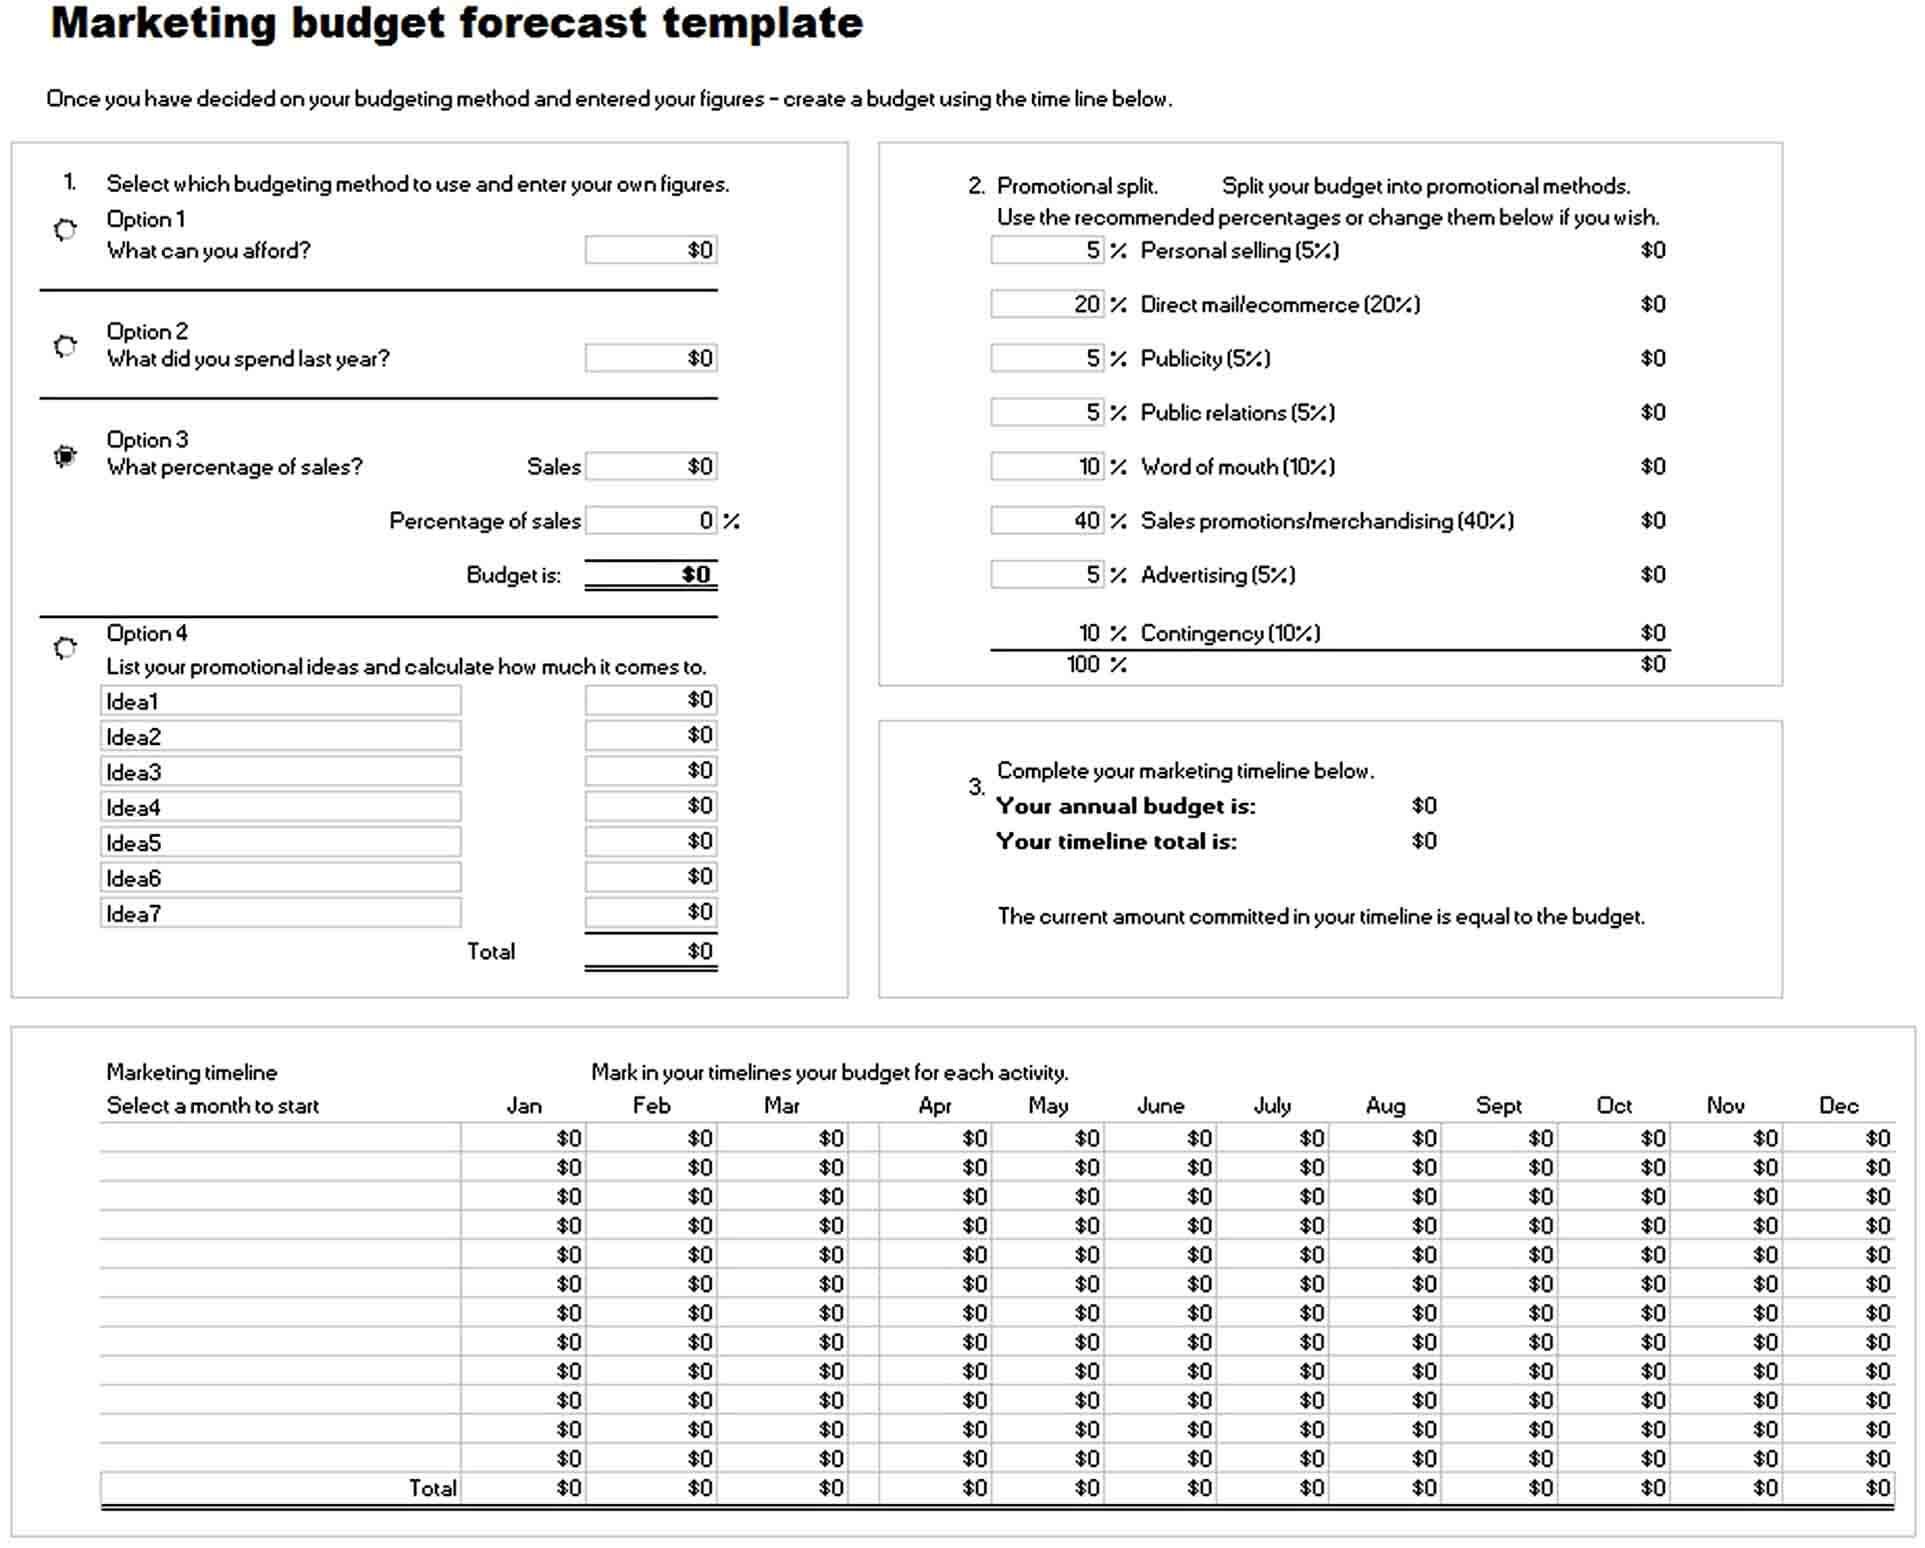 Marketing Budget Forecast Template Excel Free Download